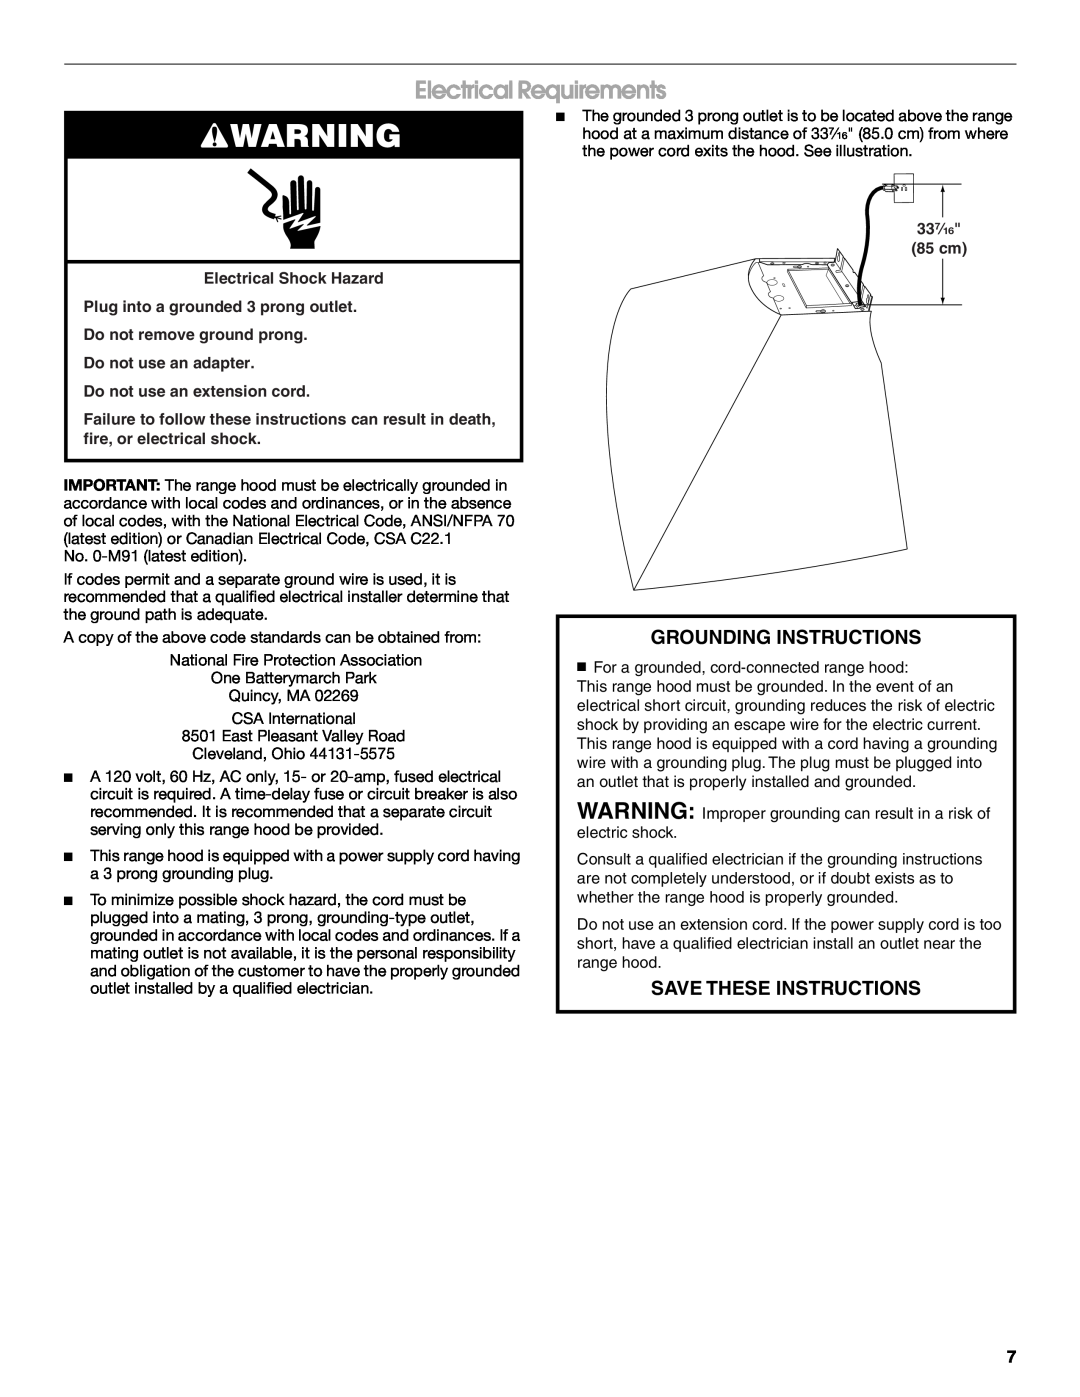 Jenn-Air LI3UUB Electrical Requirements, Grounding Instructions, Save These Instructions, Do not use an extension cord 